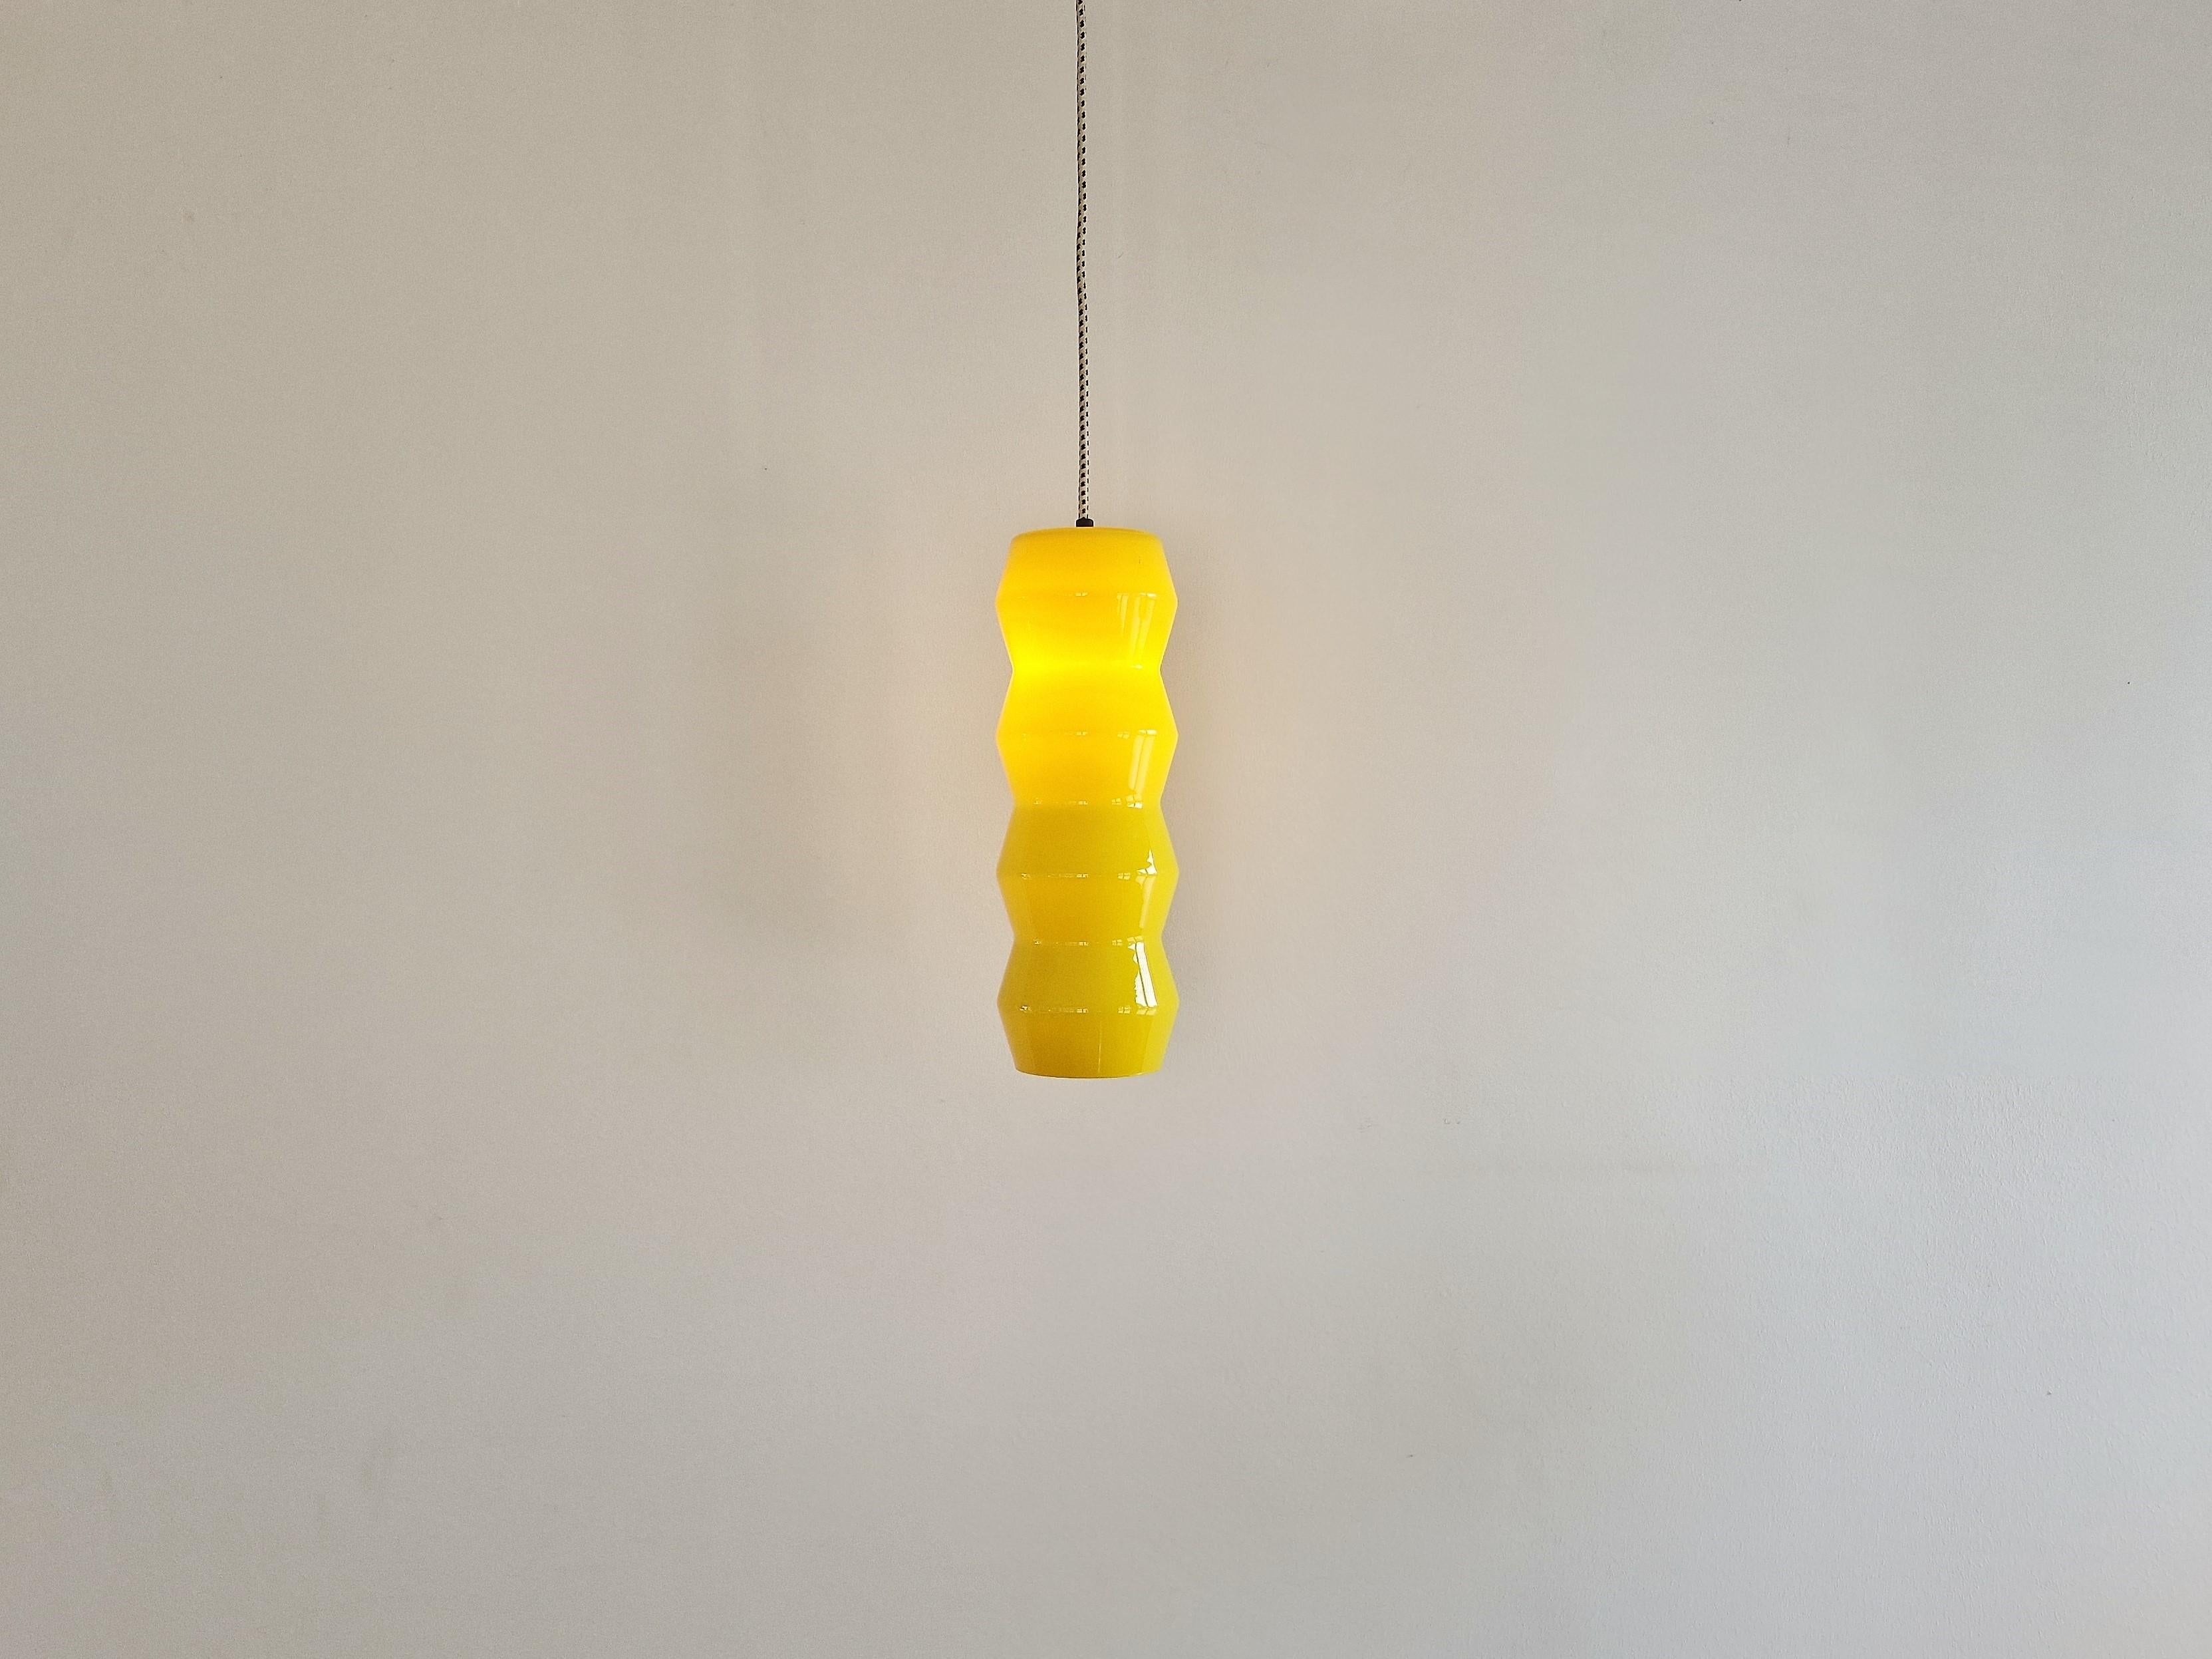 This stunning shaped glass pendant lamp is documented in a catalogue by the company of 'Indoor'. This was the importer and dealer of light brands as Vistosi, Venini and Arteluce in The Netherlands. They do not connect this light to a designer or